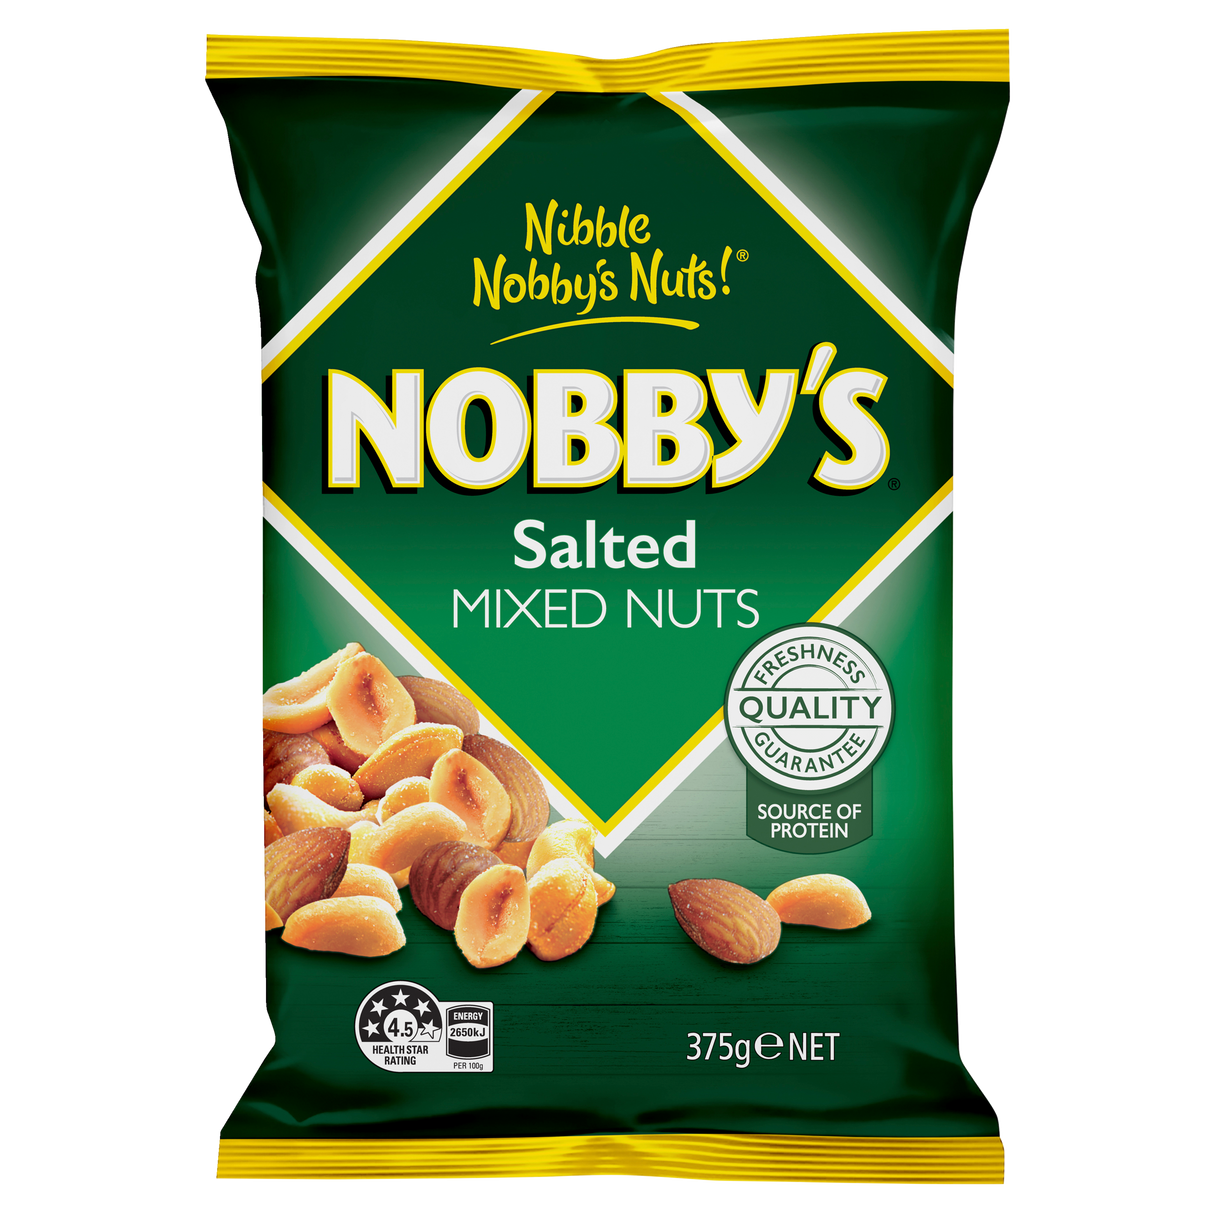 Nobby's Salted Mixed Nuts 375g